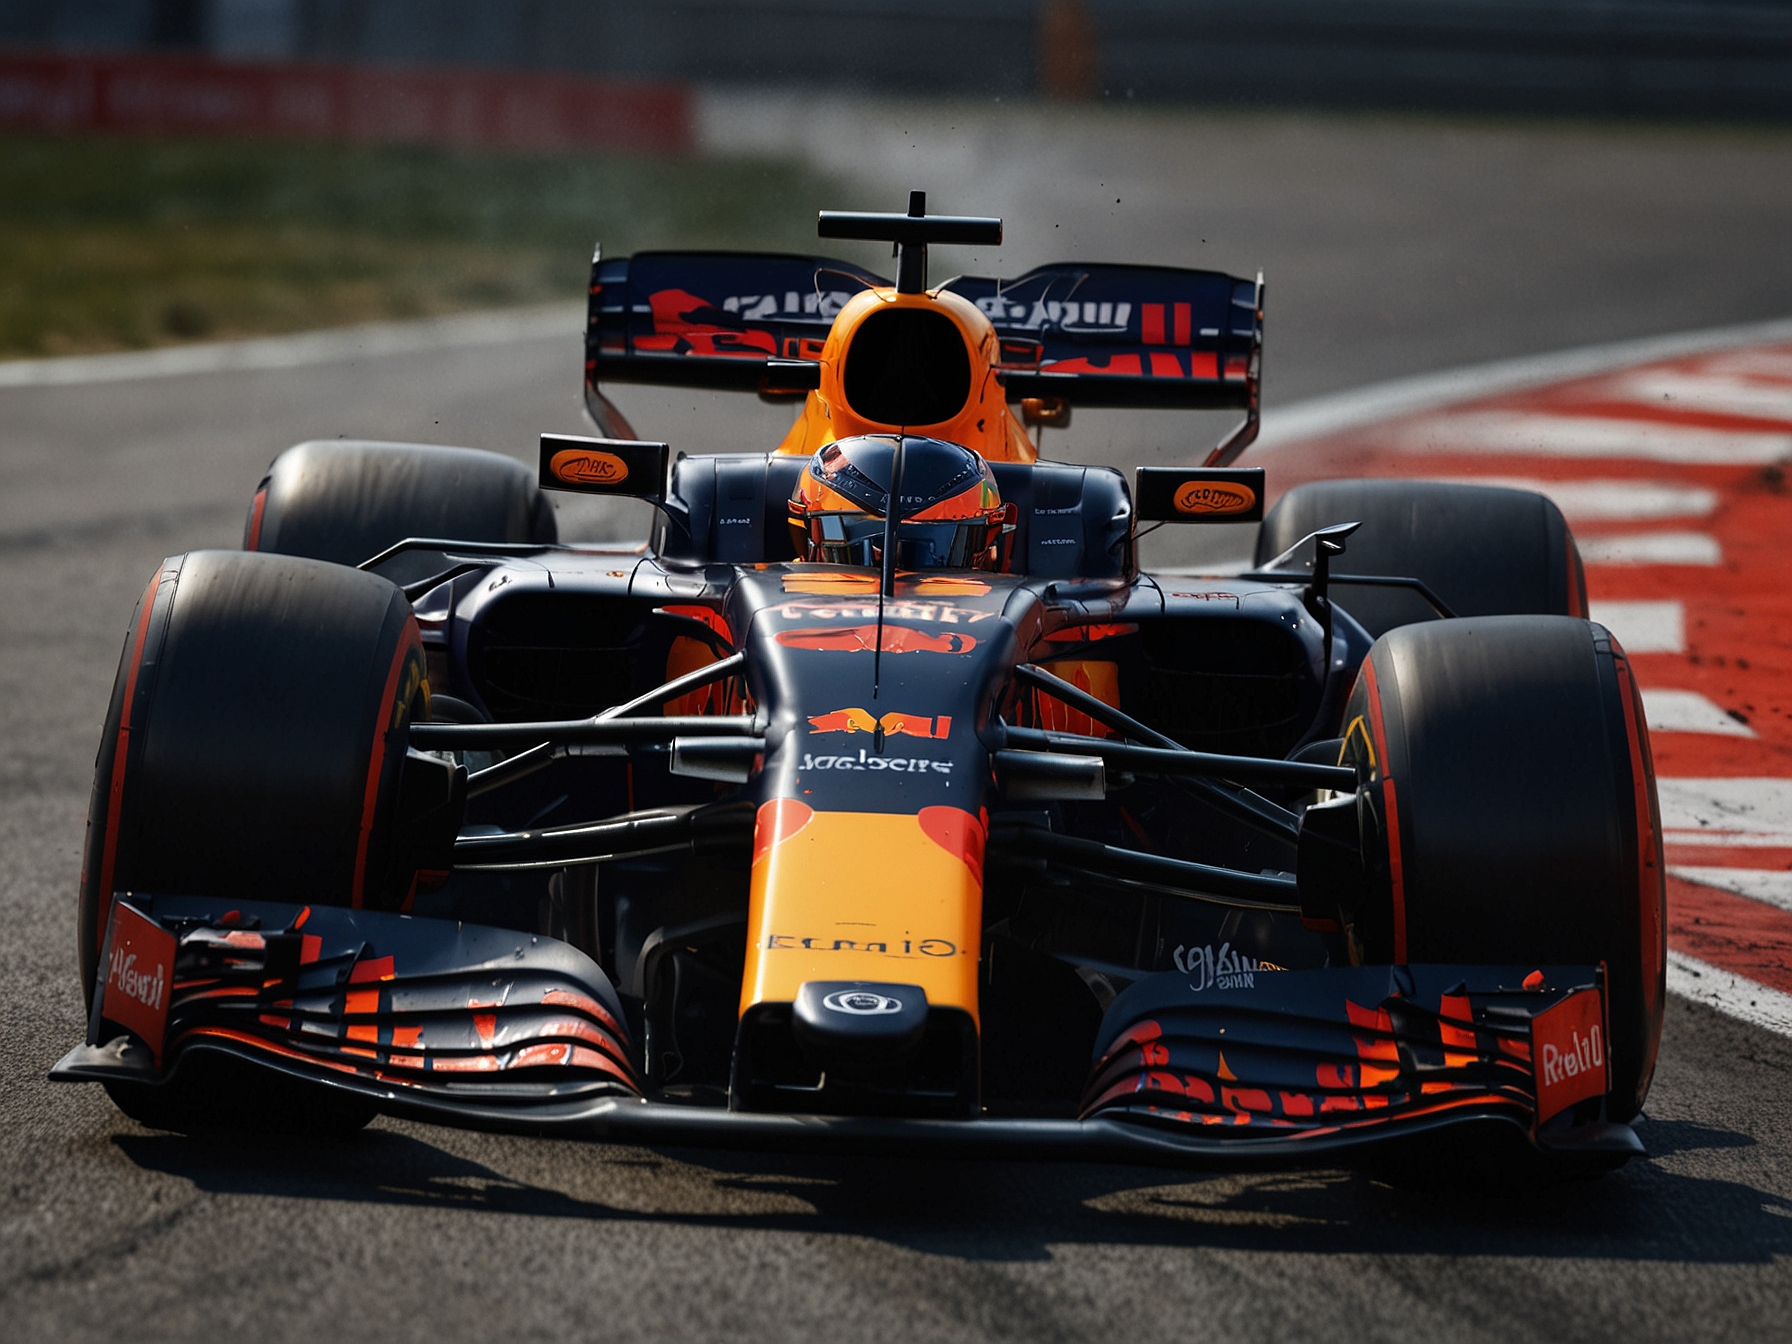 A focused Max Verstappen driving his Red Bull RB19 during a practice session at the Circuit de Catalunya, highlighting the car's speed and aerodynamic design.